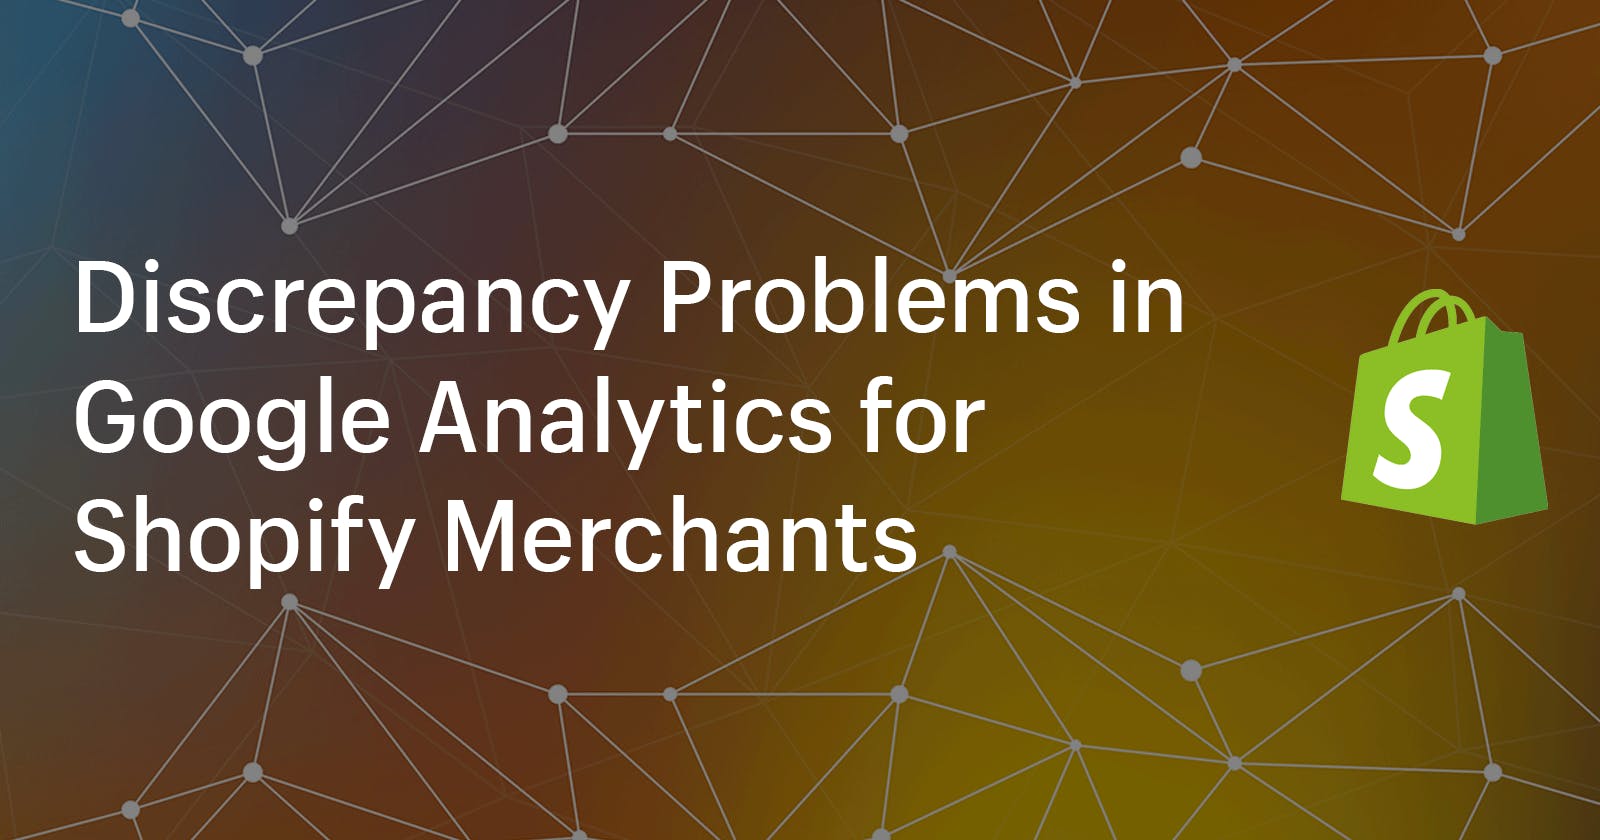 Discrepancy Problems in Google Analytics for Shopify Merchants